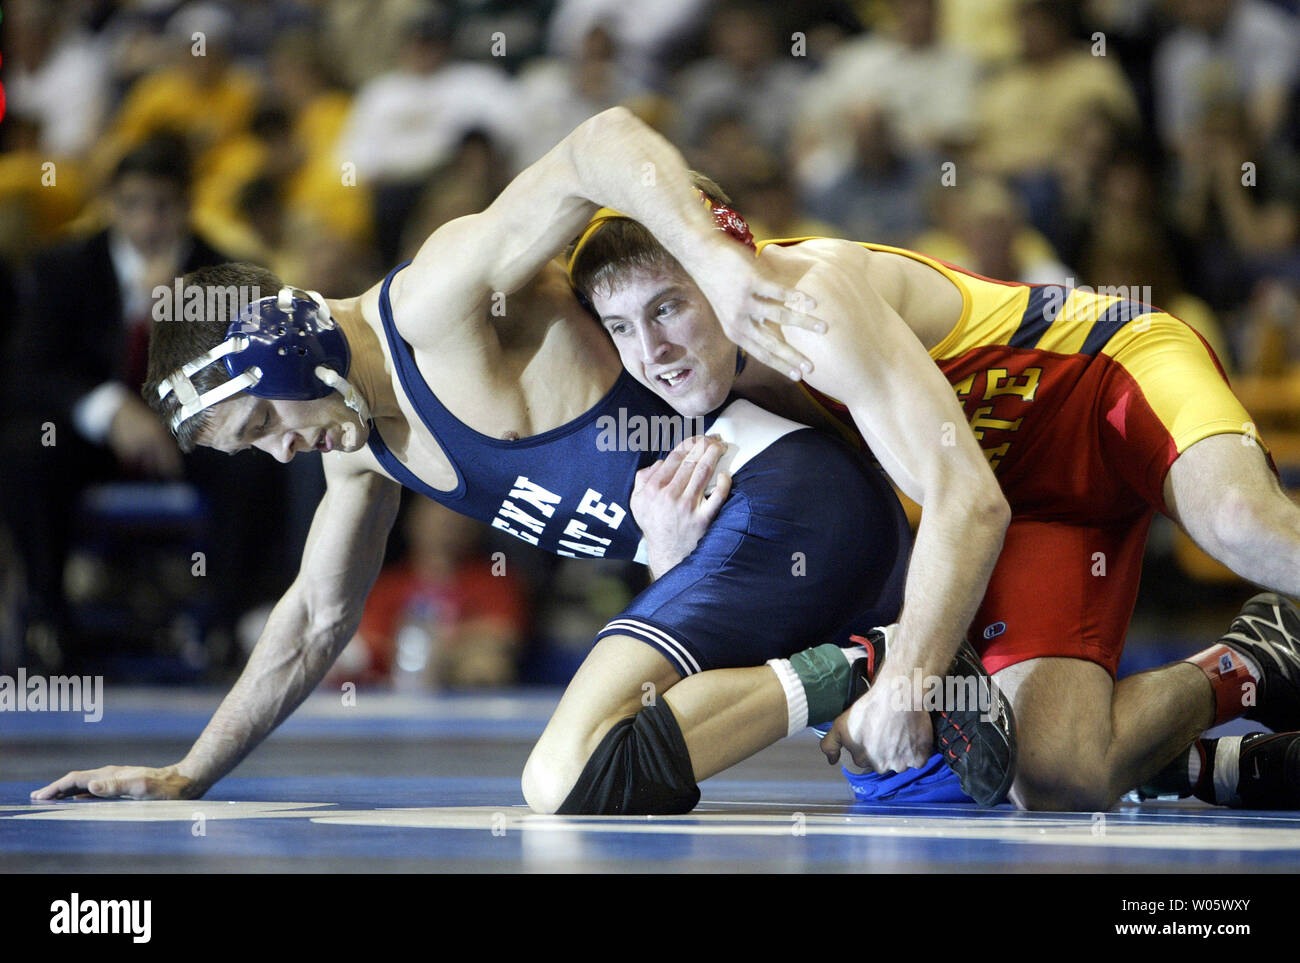 https://c8.alamy.com/comp/W05WXY/penn-states-josh-moore-l-tries-to-free-himself-from-the-grasp-of-iowa-states-zach-roberson-during-their-championship-match-in-the-133-pound-weight-class-of-the-ncaa-division-1-wrestling-championships-at-the-savvis-center-in-st-louis-on-mar5ch-20-2004-roberson-won-the-match-upi-photobill-greenblatt-W05WXY.jpg